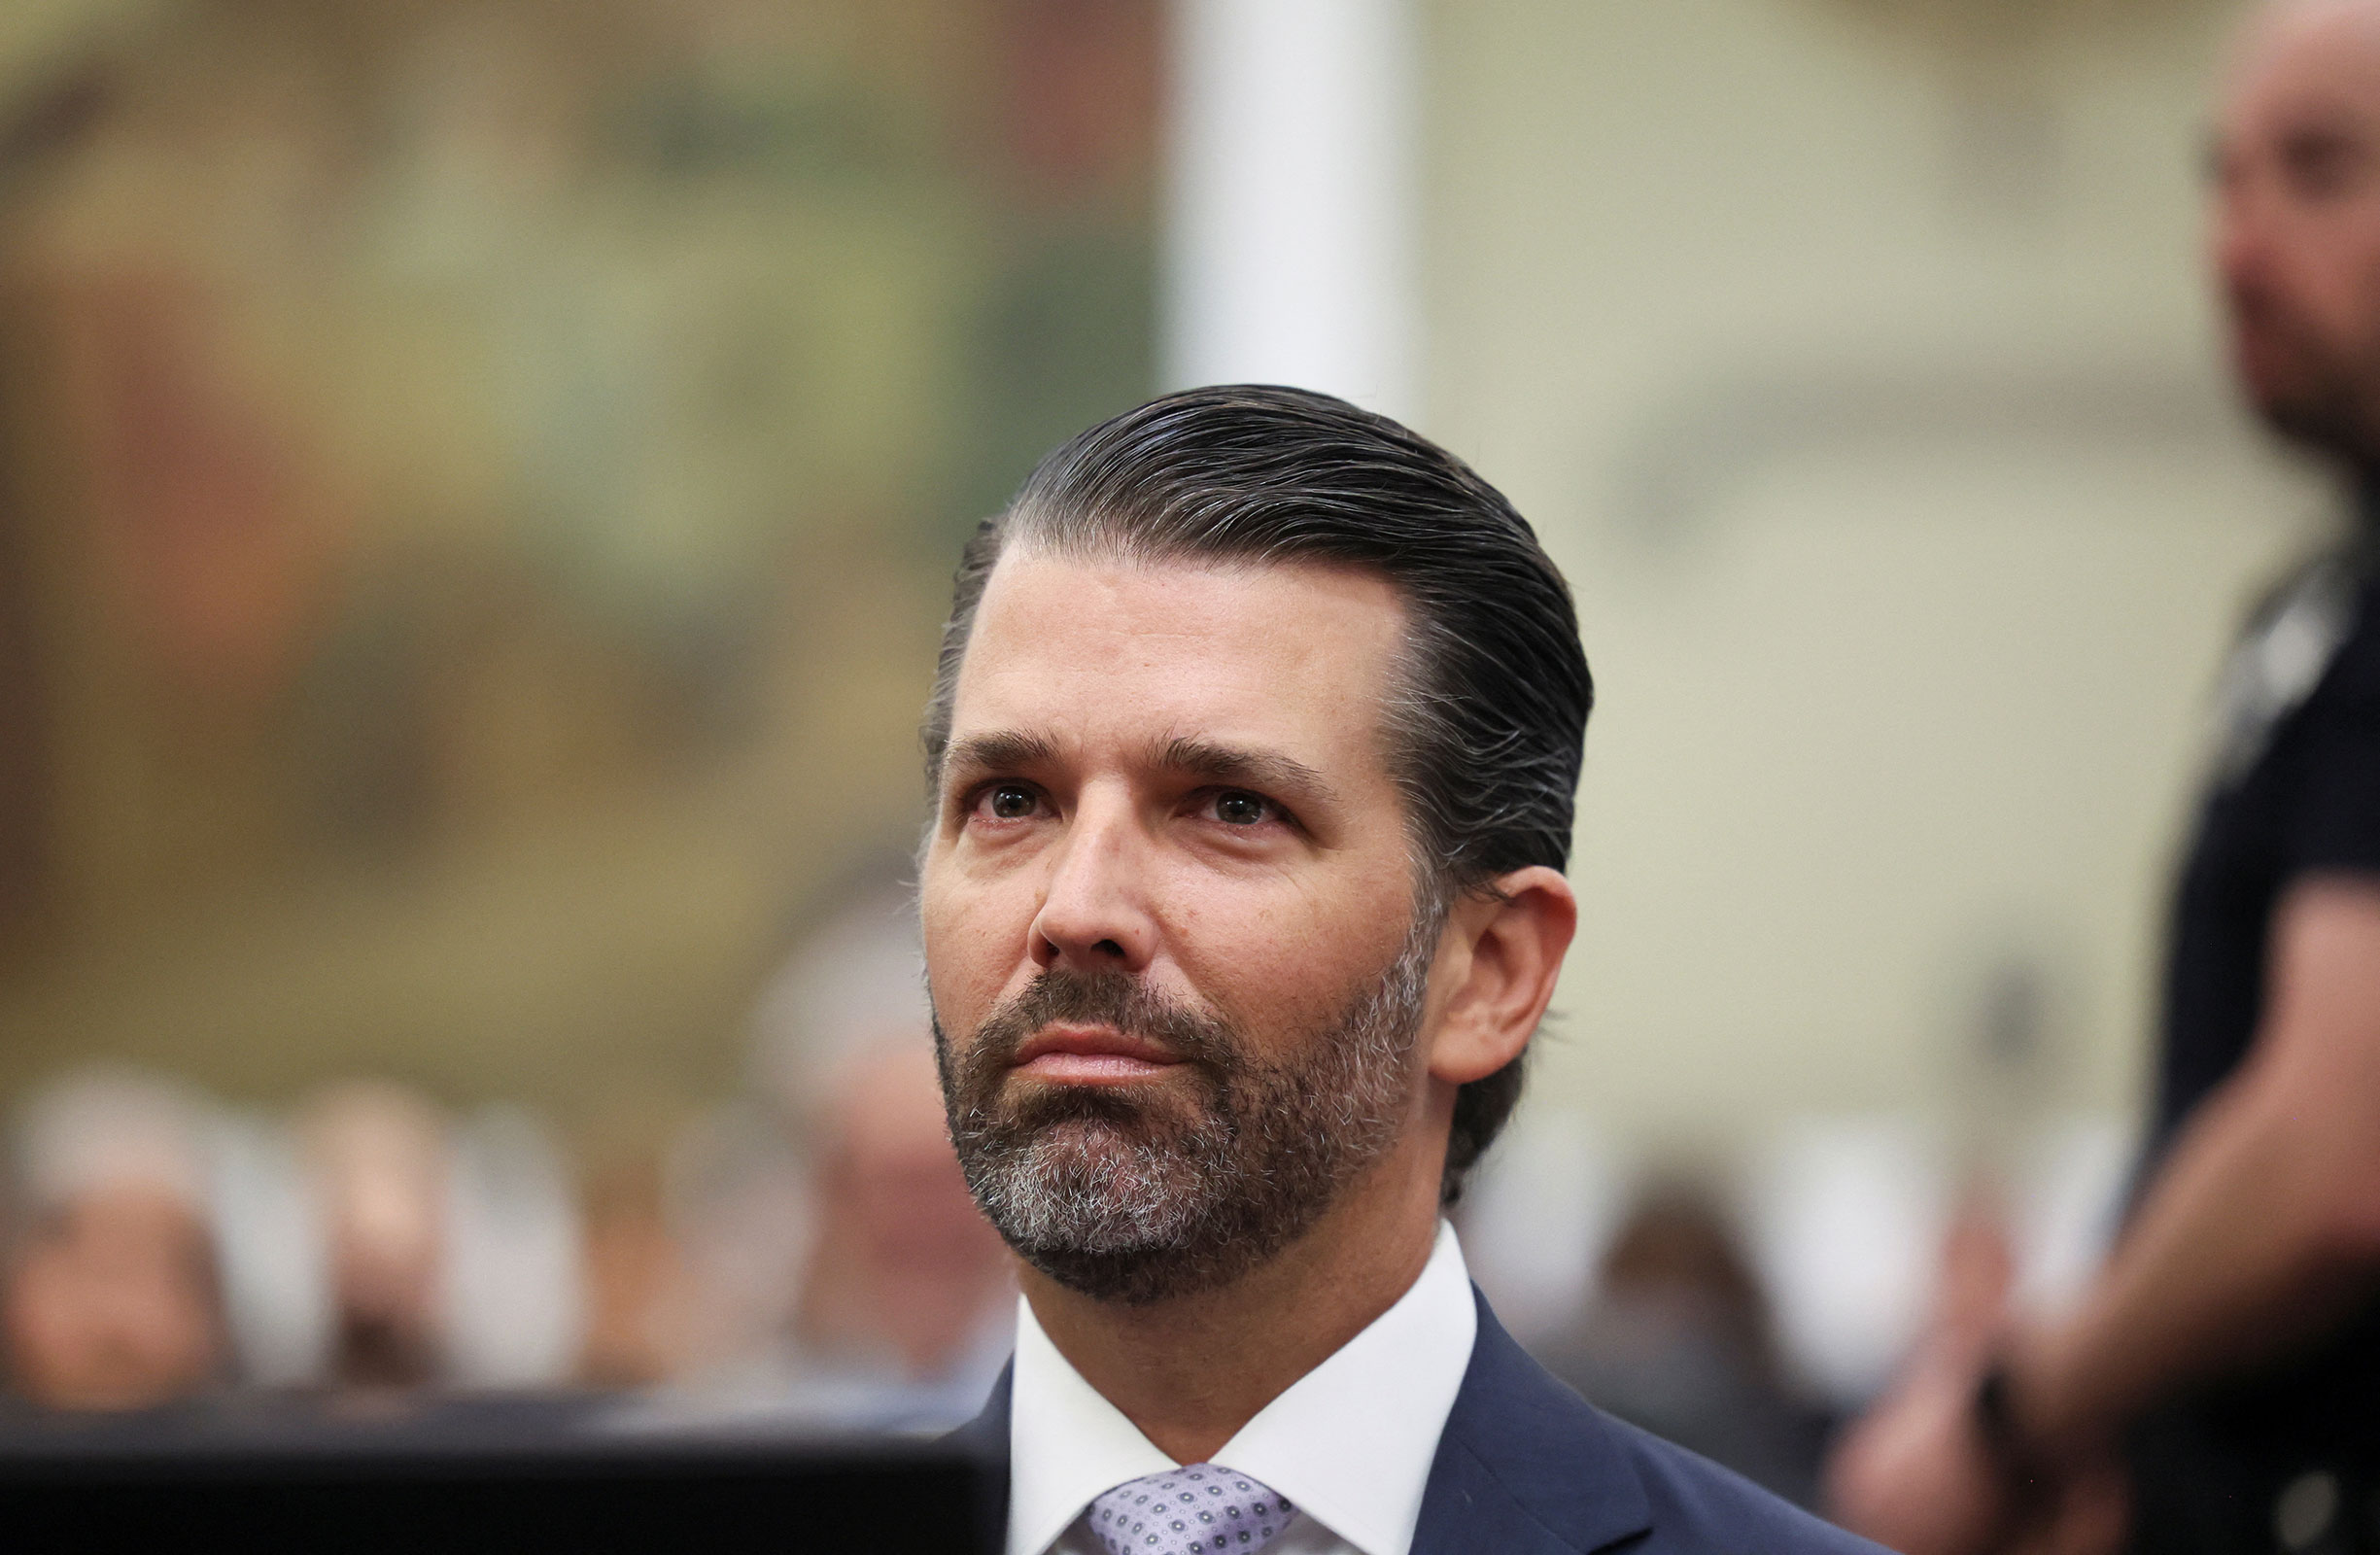 Former President Donald Trump's son and co-defendant Donald Trump Jr. attends the Trump Organization civil fraud trial at New York Supreme Court on November 13.